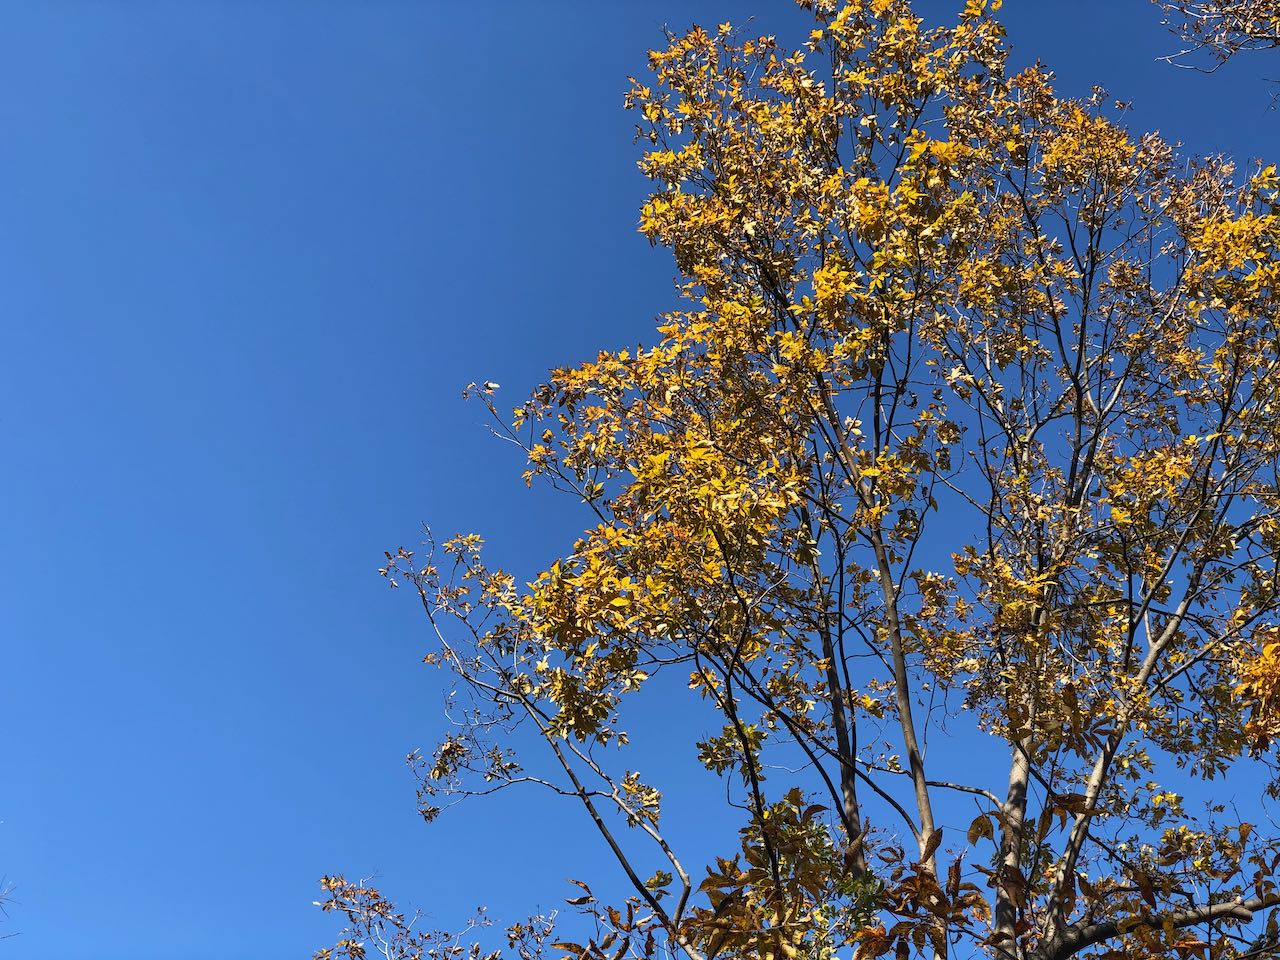 Looking up at a tree with a beautiful blue sky